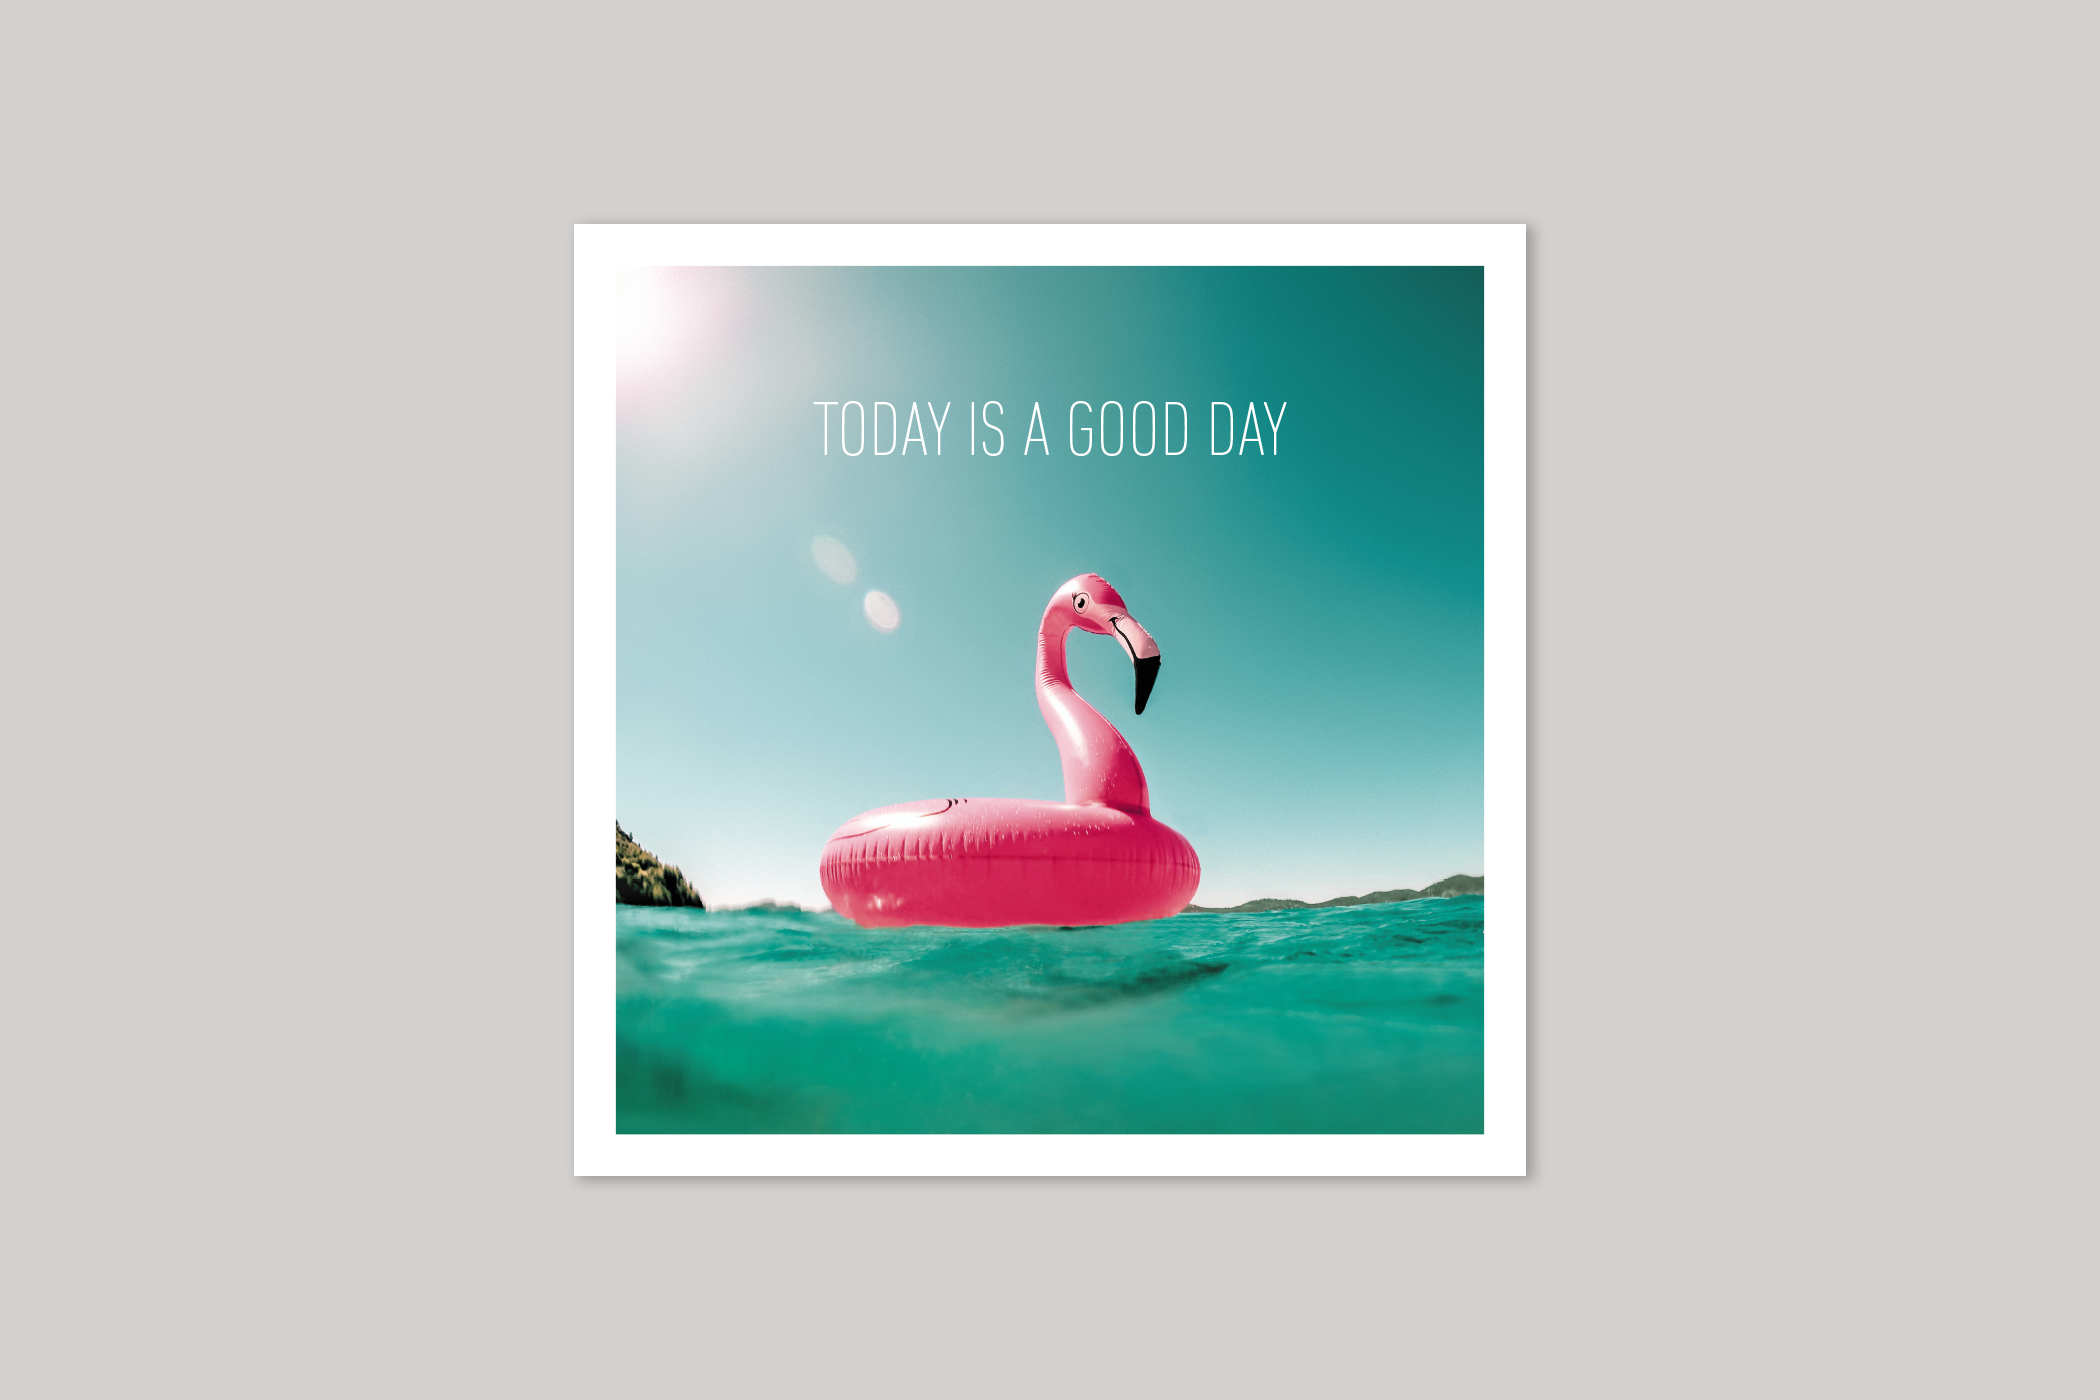 Today is A Good Day from Beautiful Days range of contemporary photographic cards by Icon.